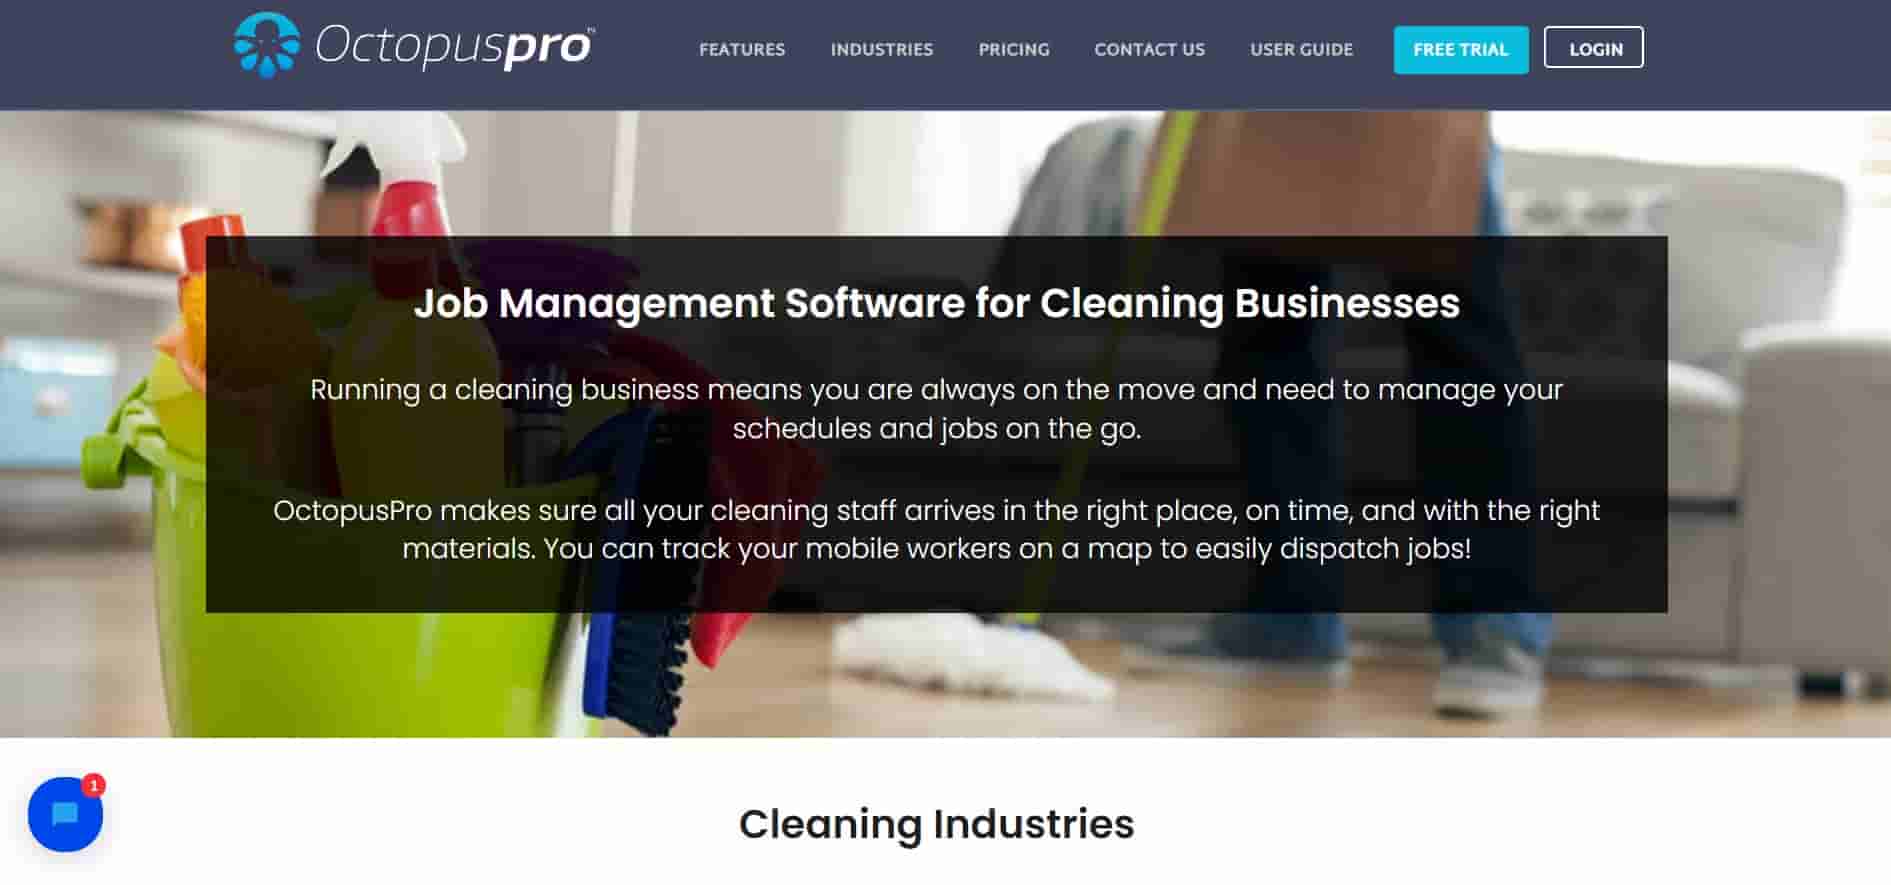 Composite image of OctopusPro website's page where in the background a cleaner is working